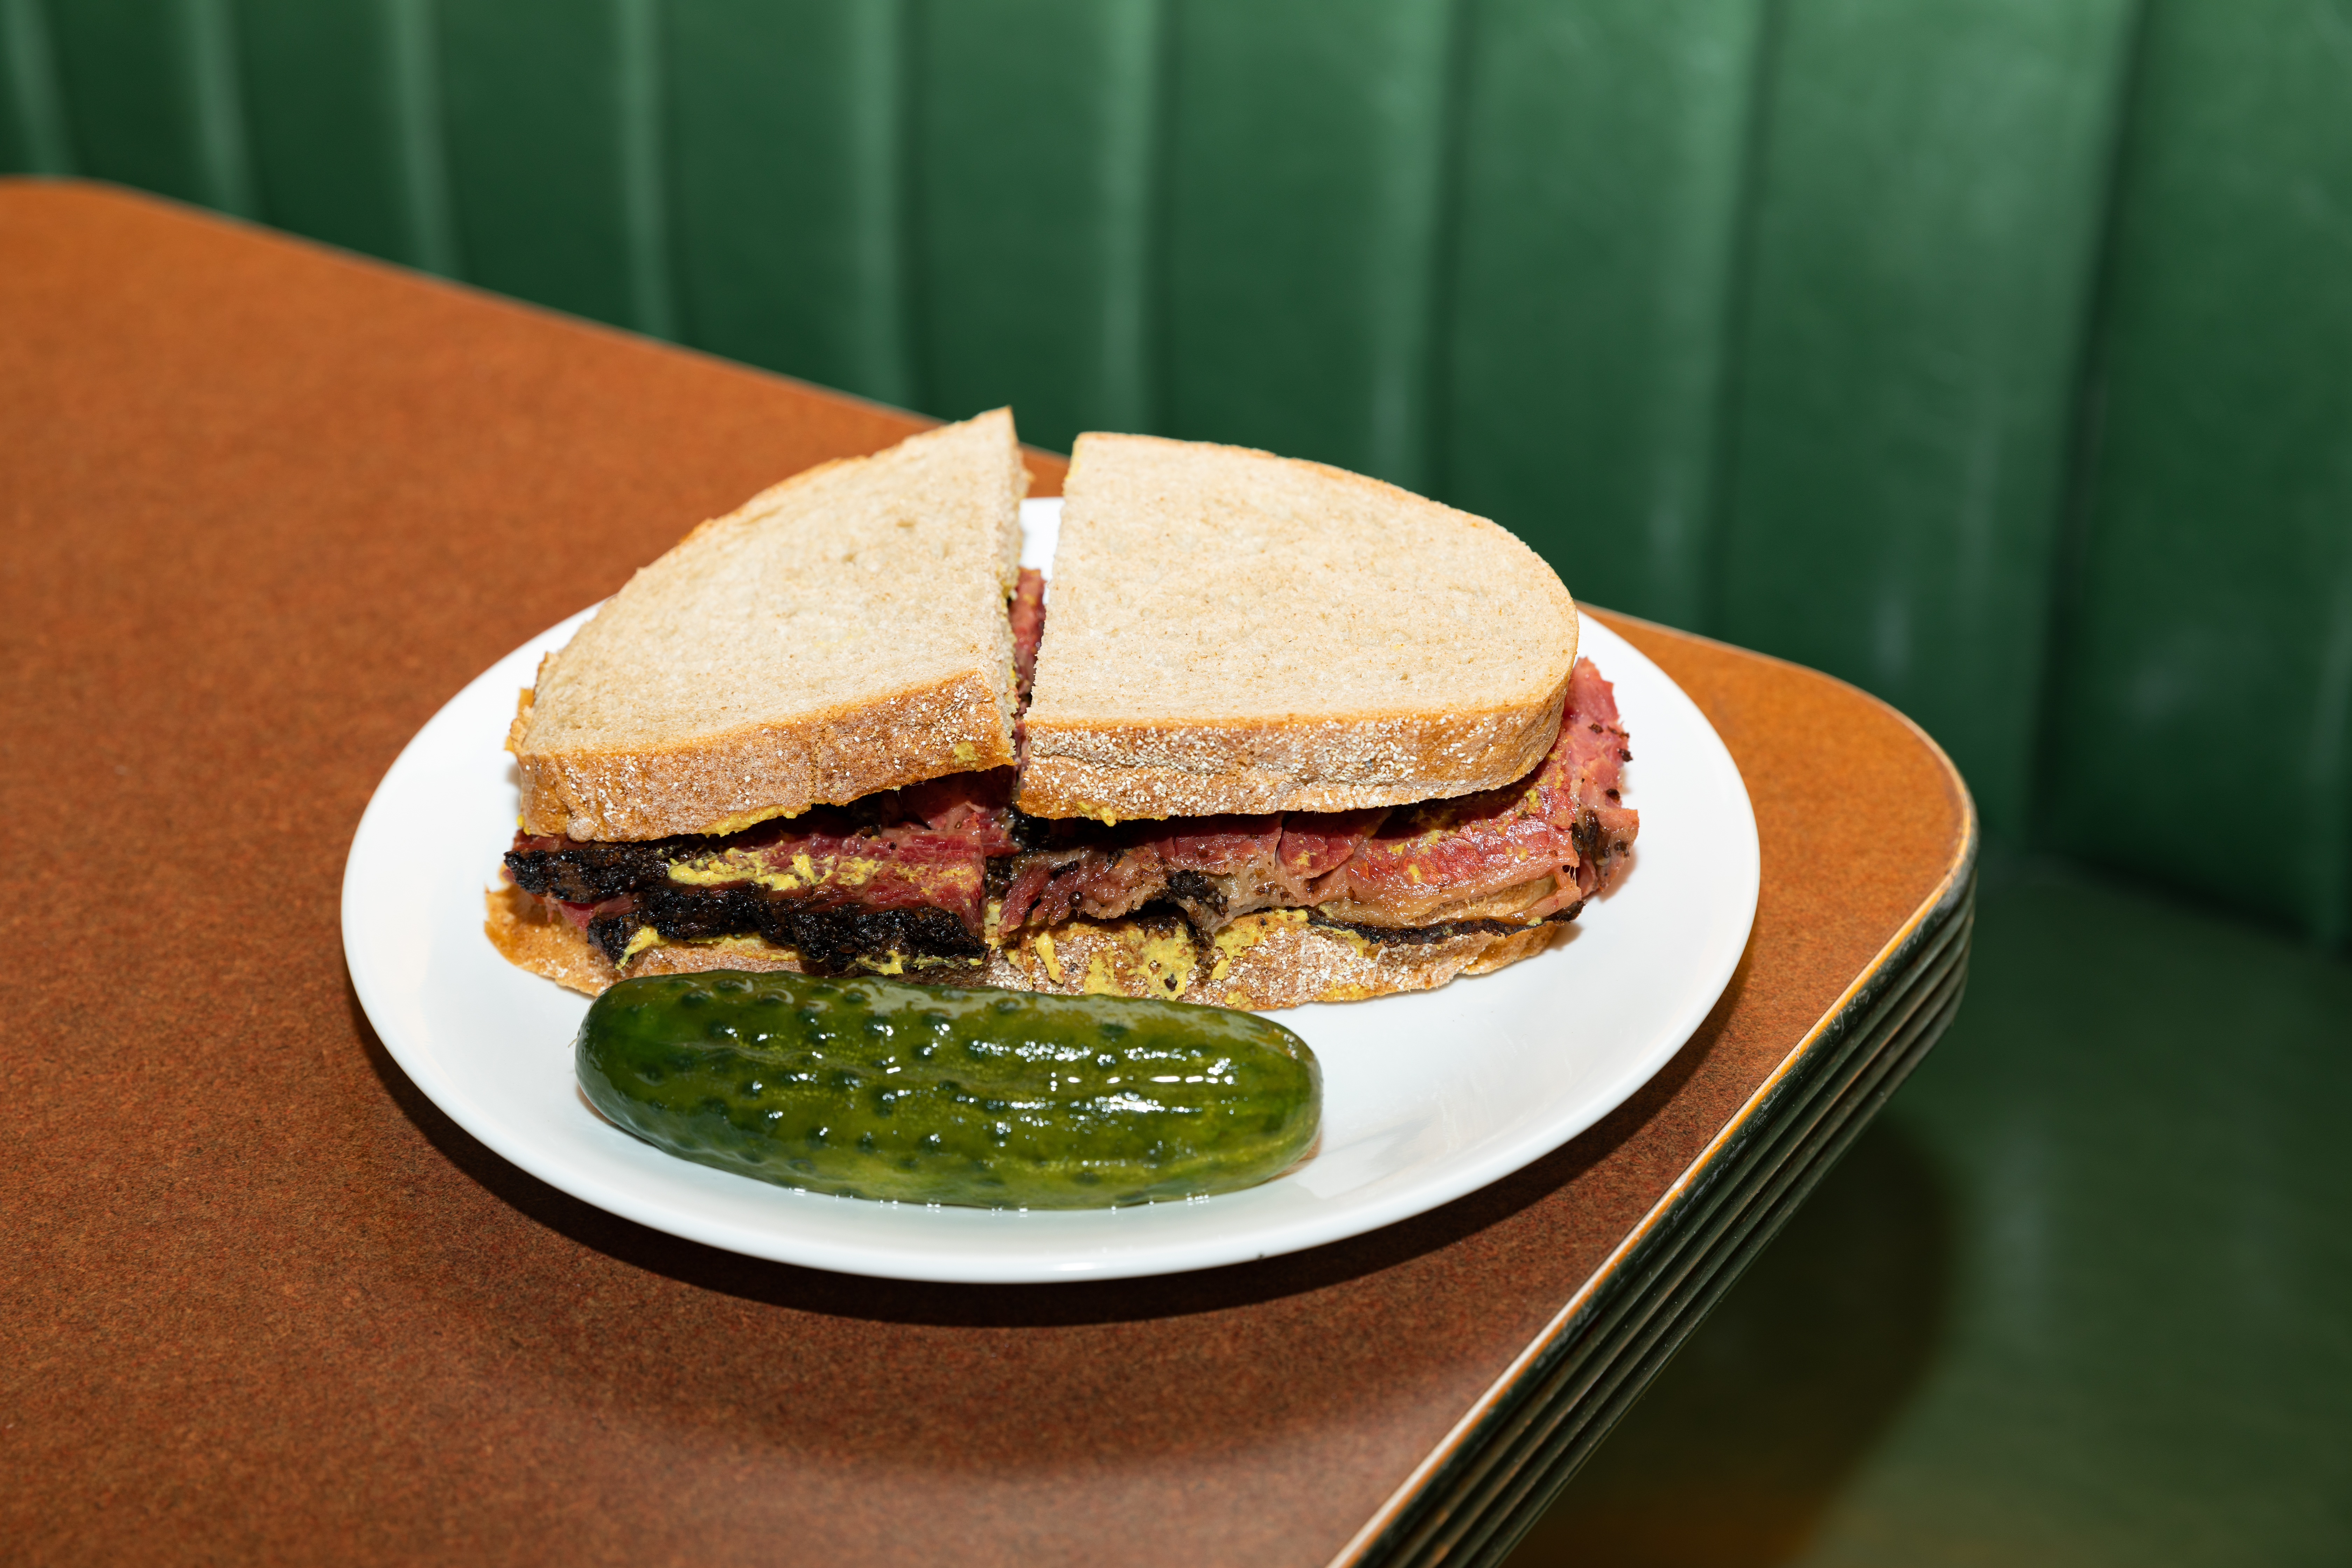 A mustardy pastrami sandwich on rye bread is served on a plate with a half-sour pickle.